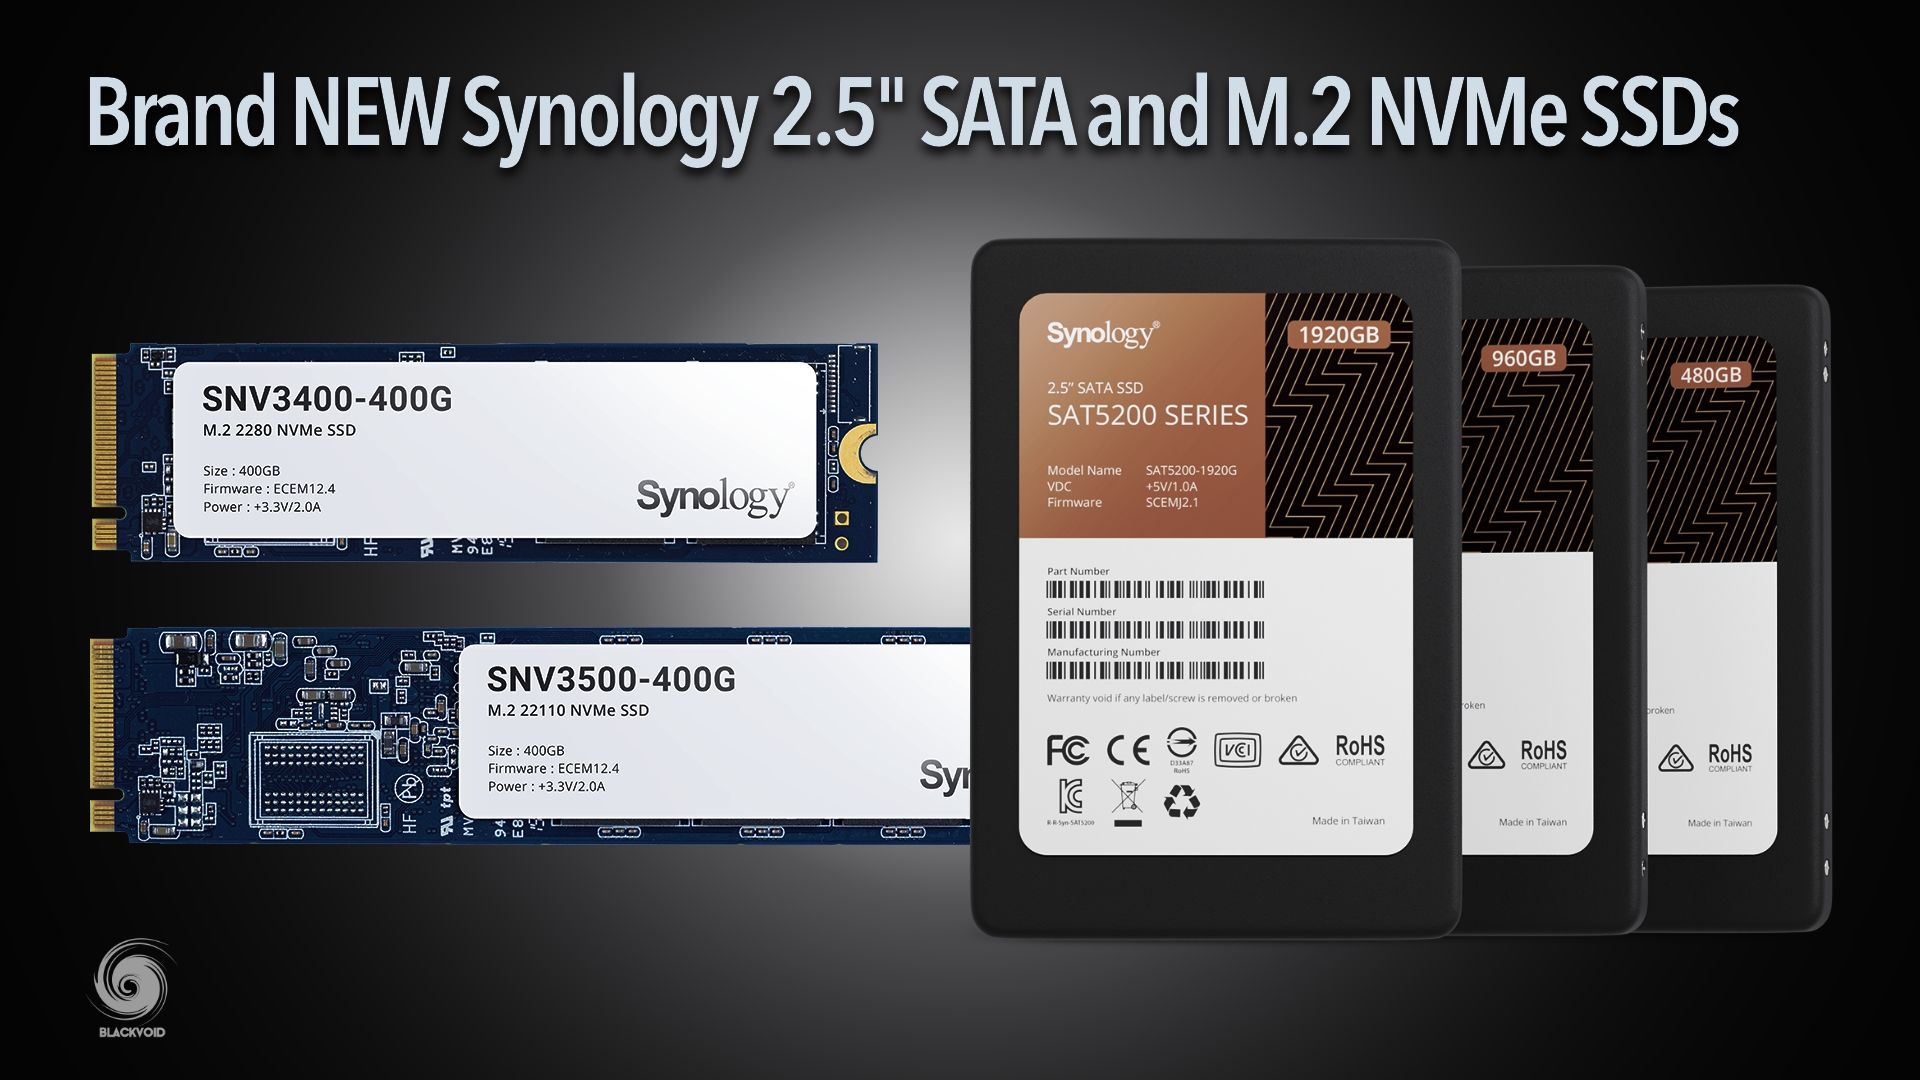 NEW Synology 2.5" SATA and M.2 NVMe SSDs are here